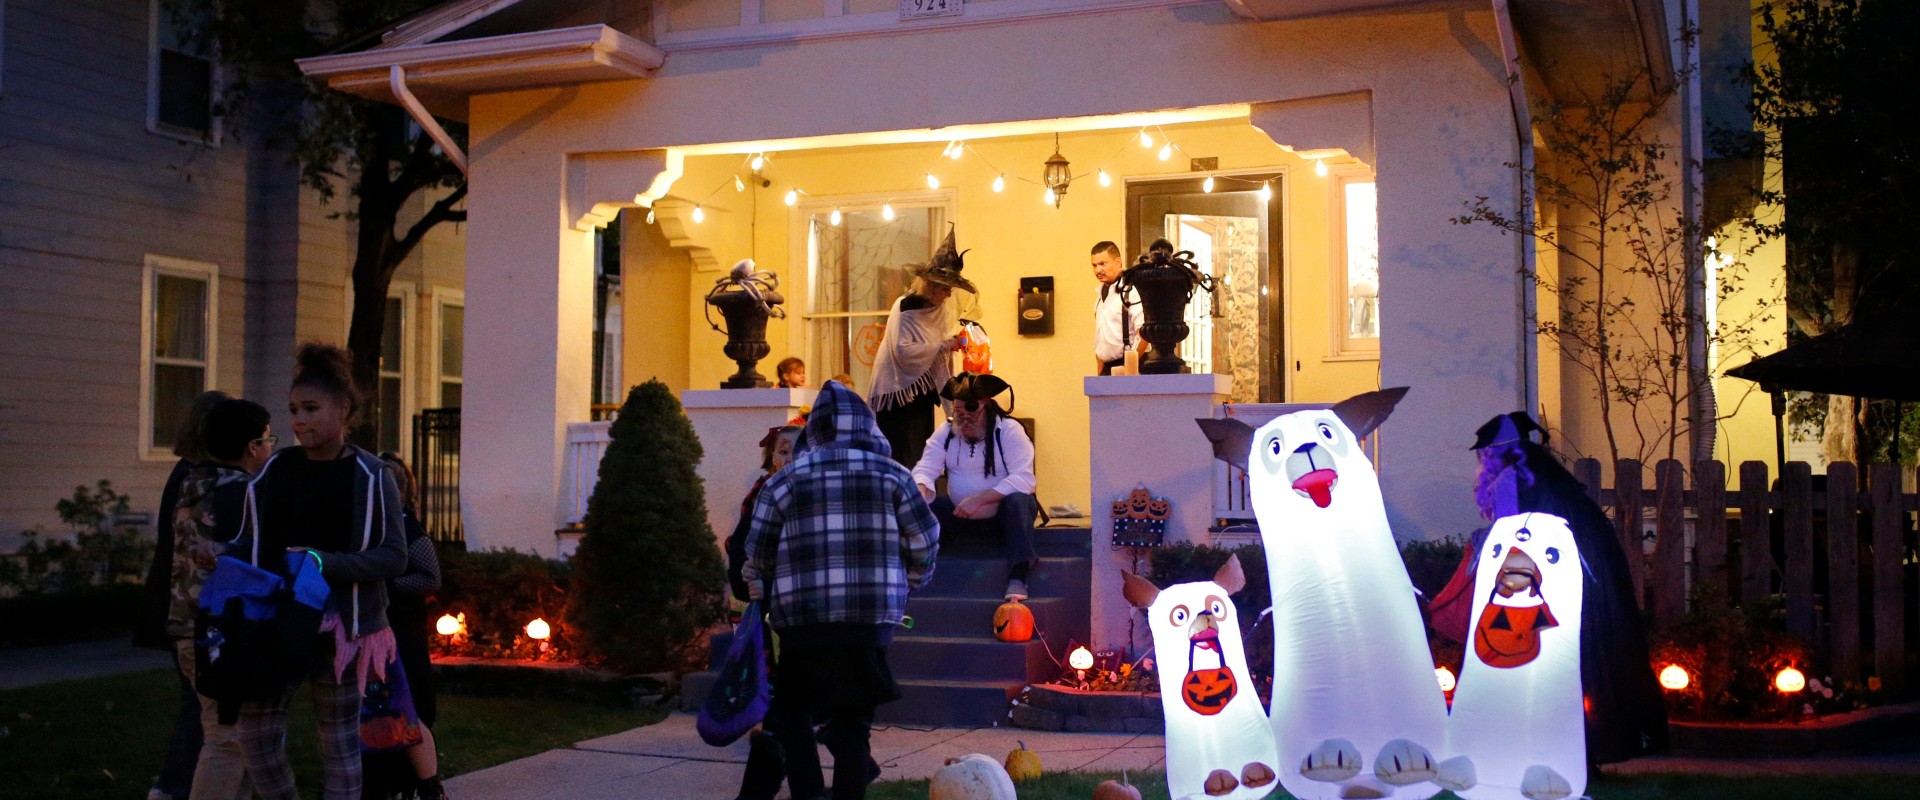 The Best Trick-or-Treating Spots in Oklahoma City for Halloween